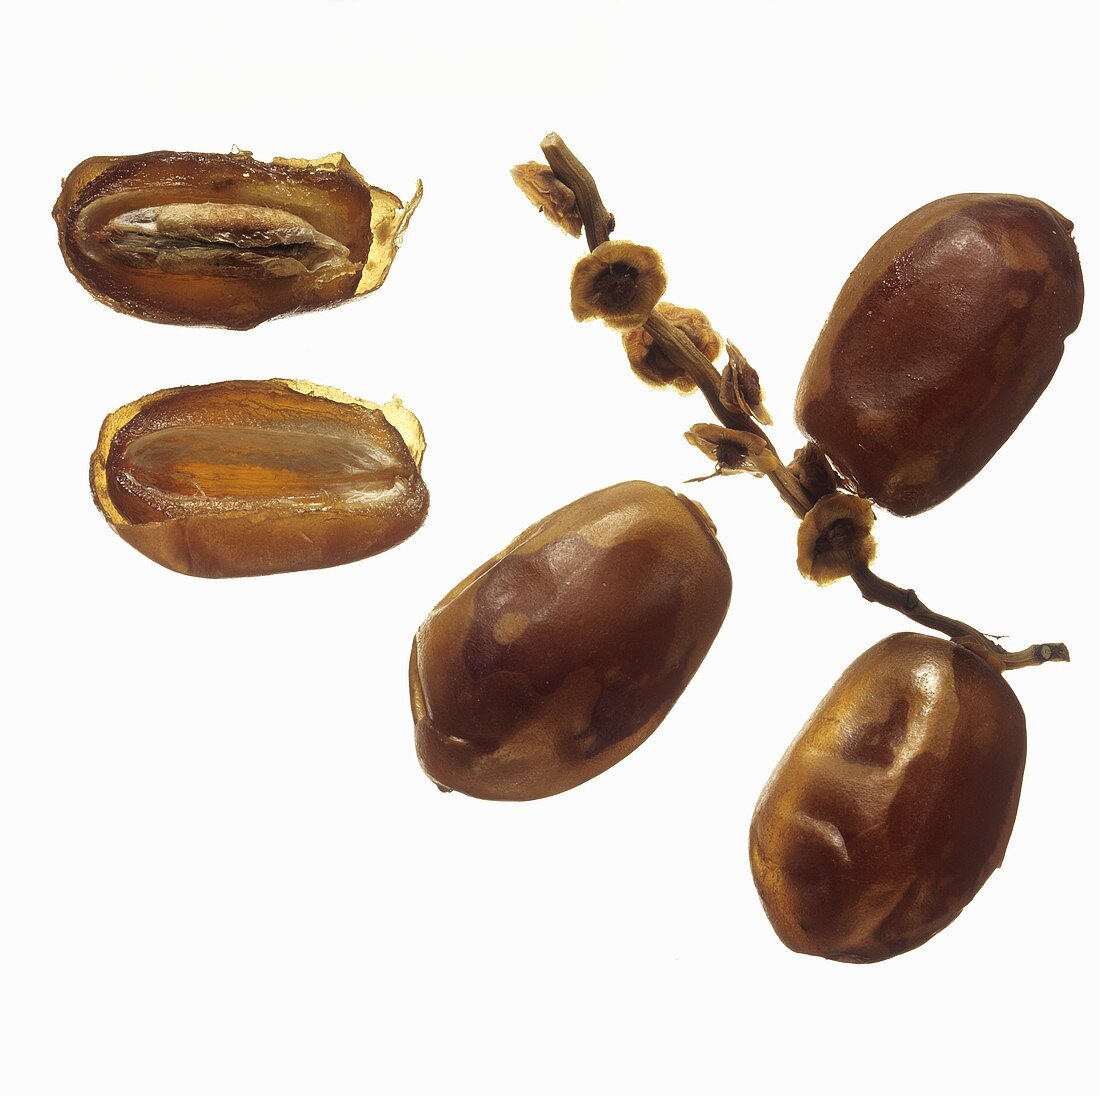 Twig with two dates, single whole date and two halves